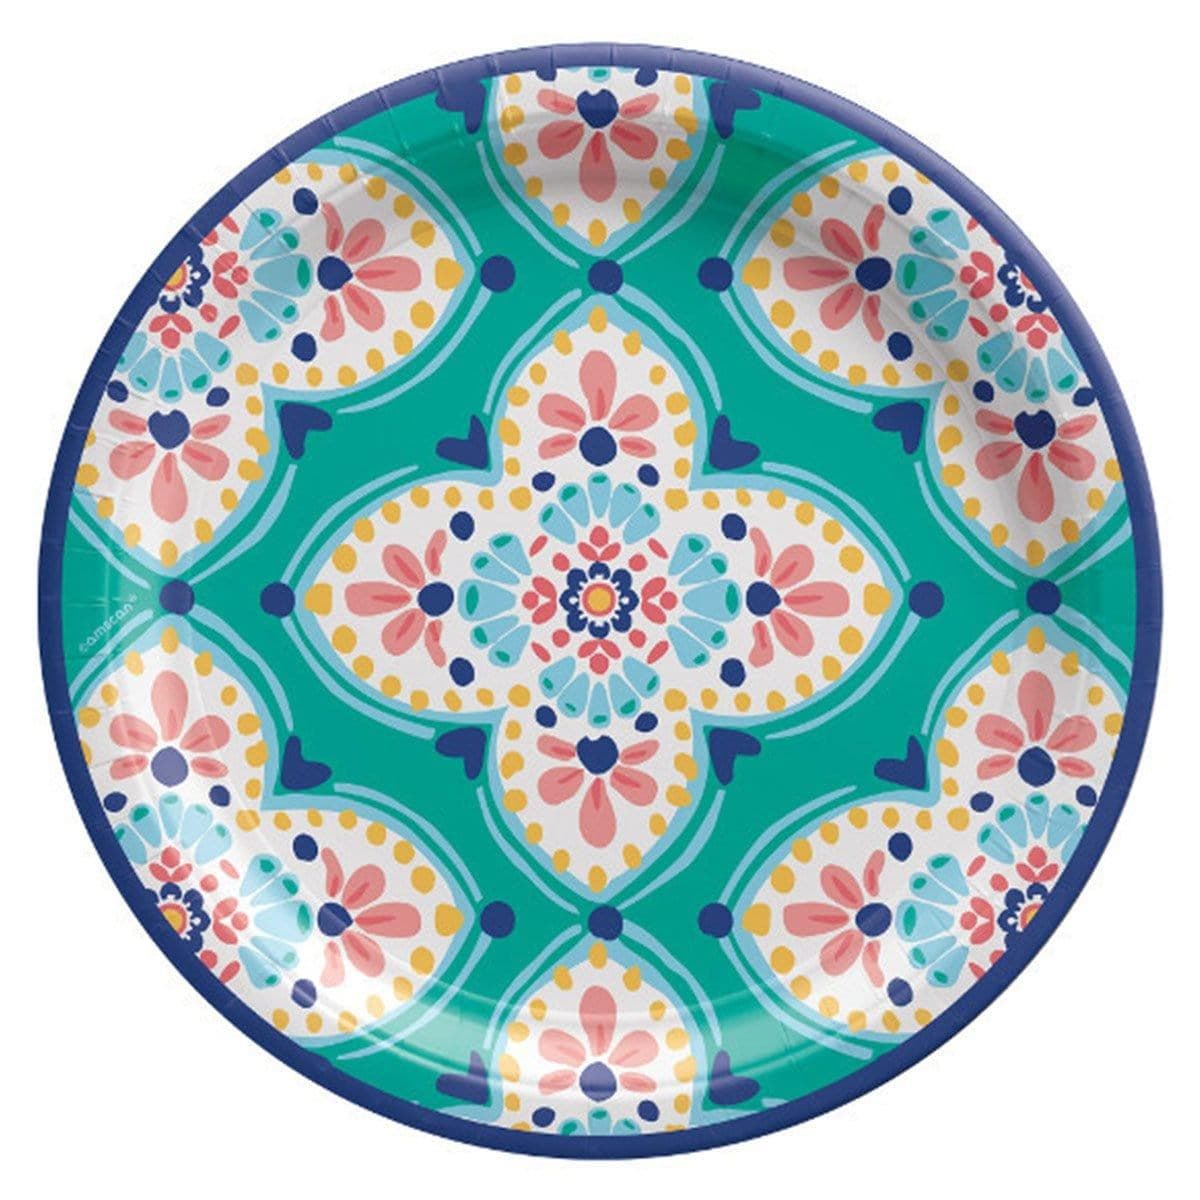 Buy Summer Boho Vibes paper plates 10.5 inches, 8 per package sold at Party Expert